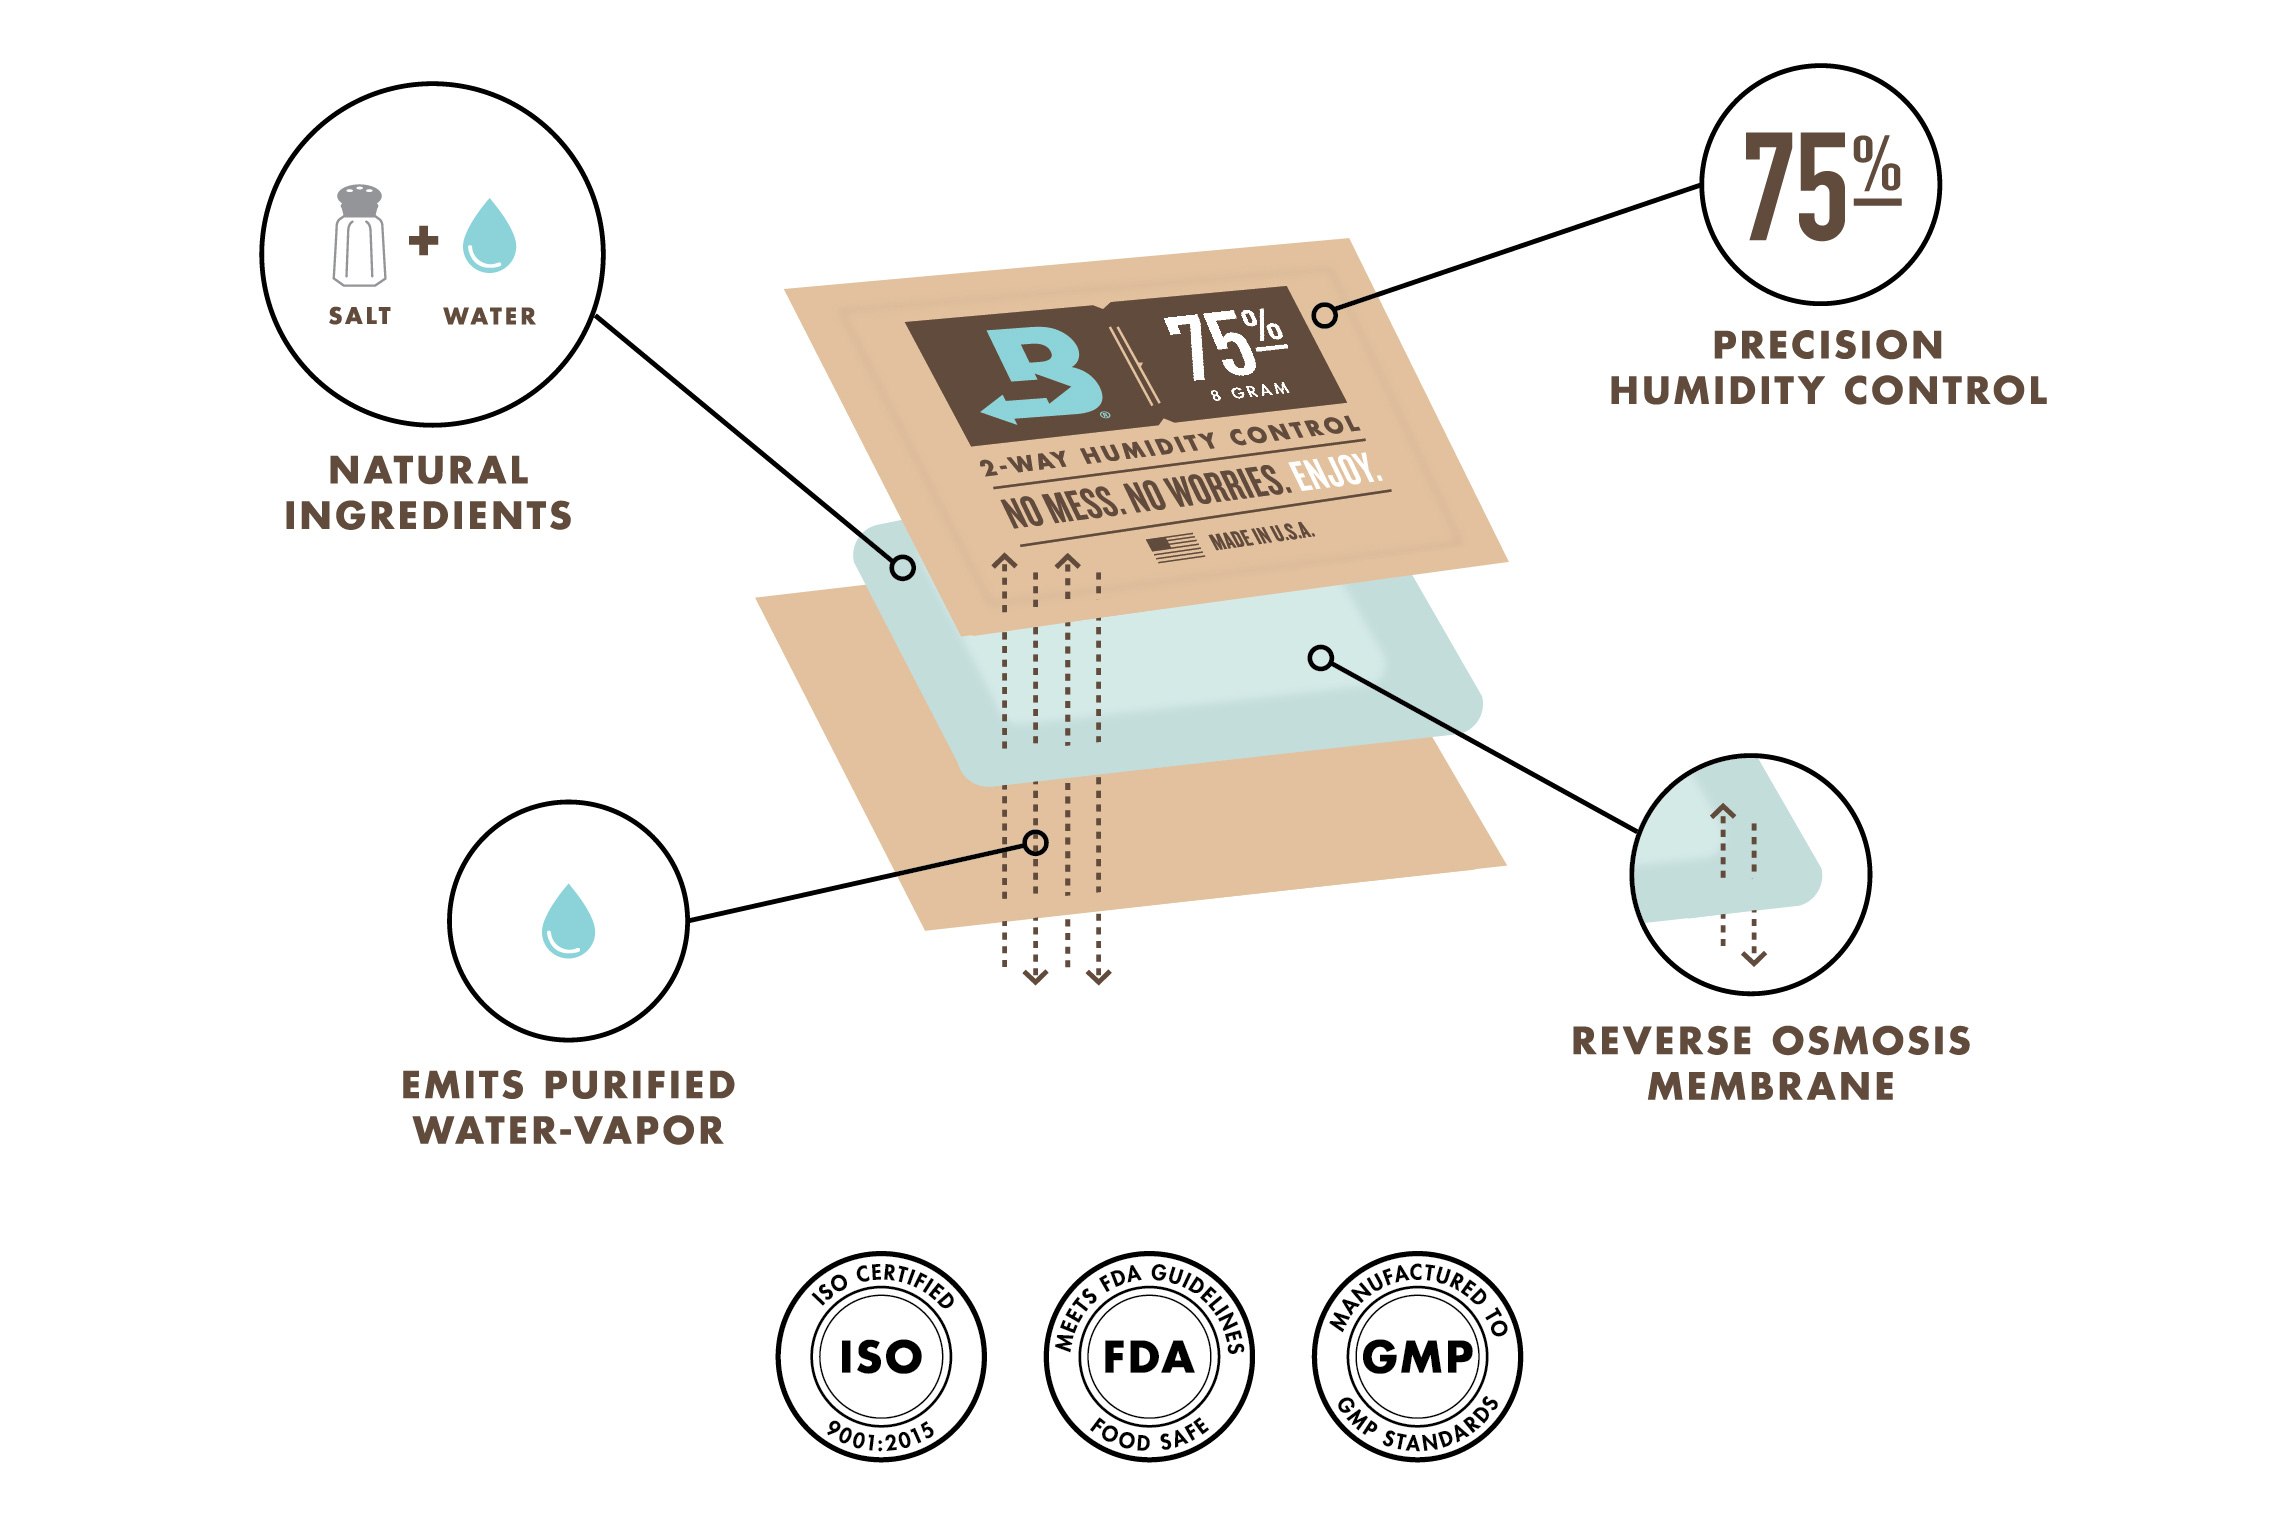 Boveda is The Only Precise Humidity Control